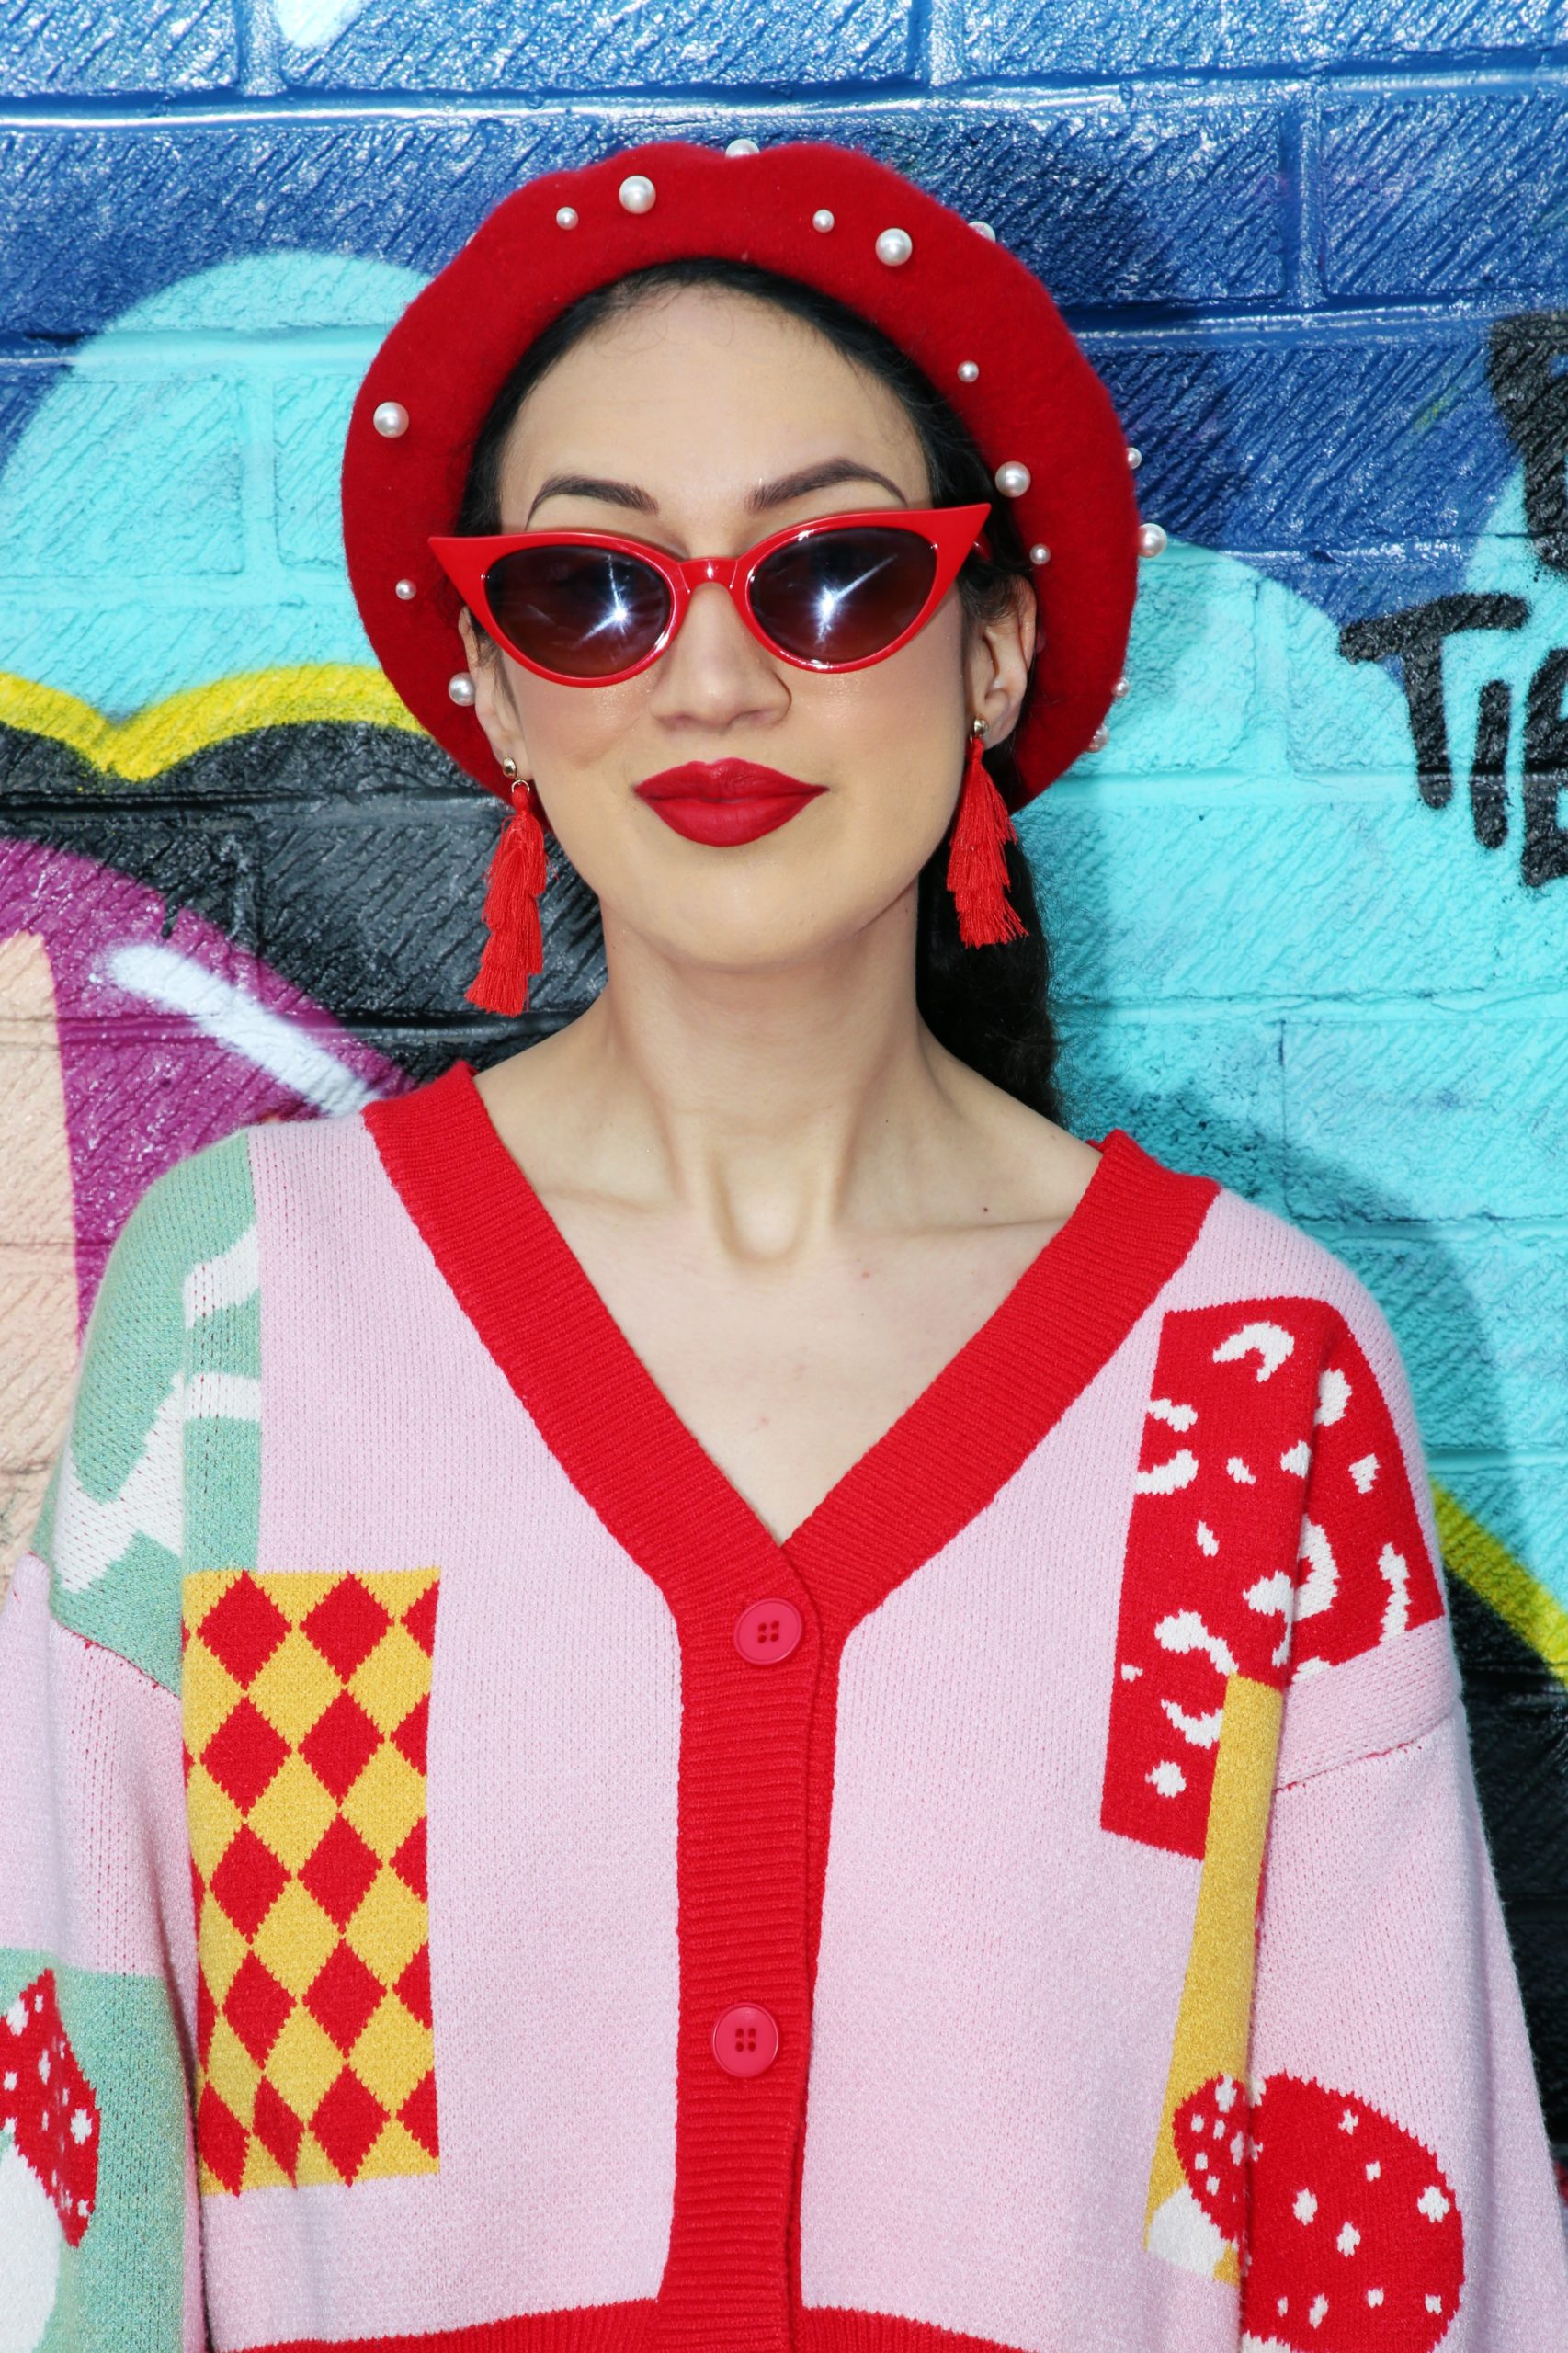 <img src="ana.jpg" alt="ana in red sunglasses and pink cardigan"/> 